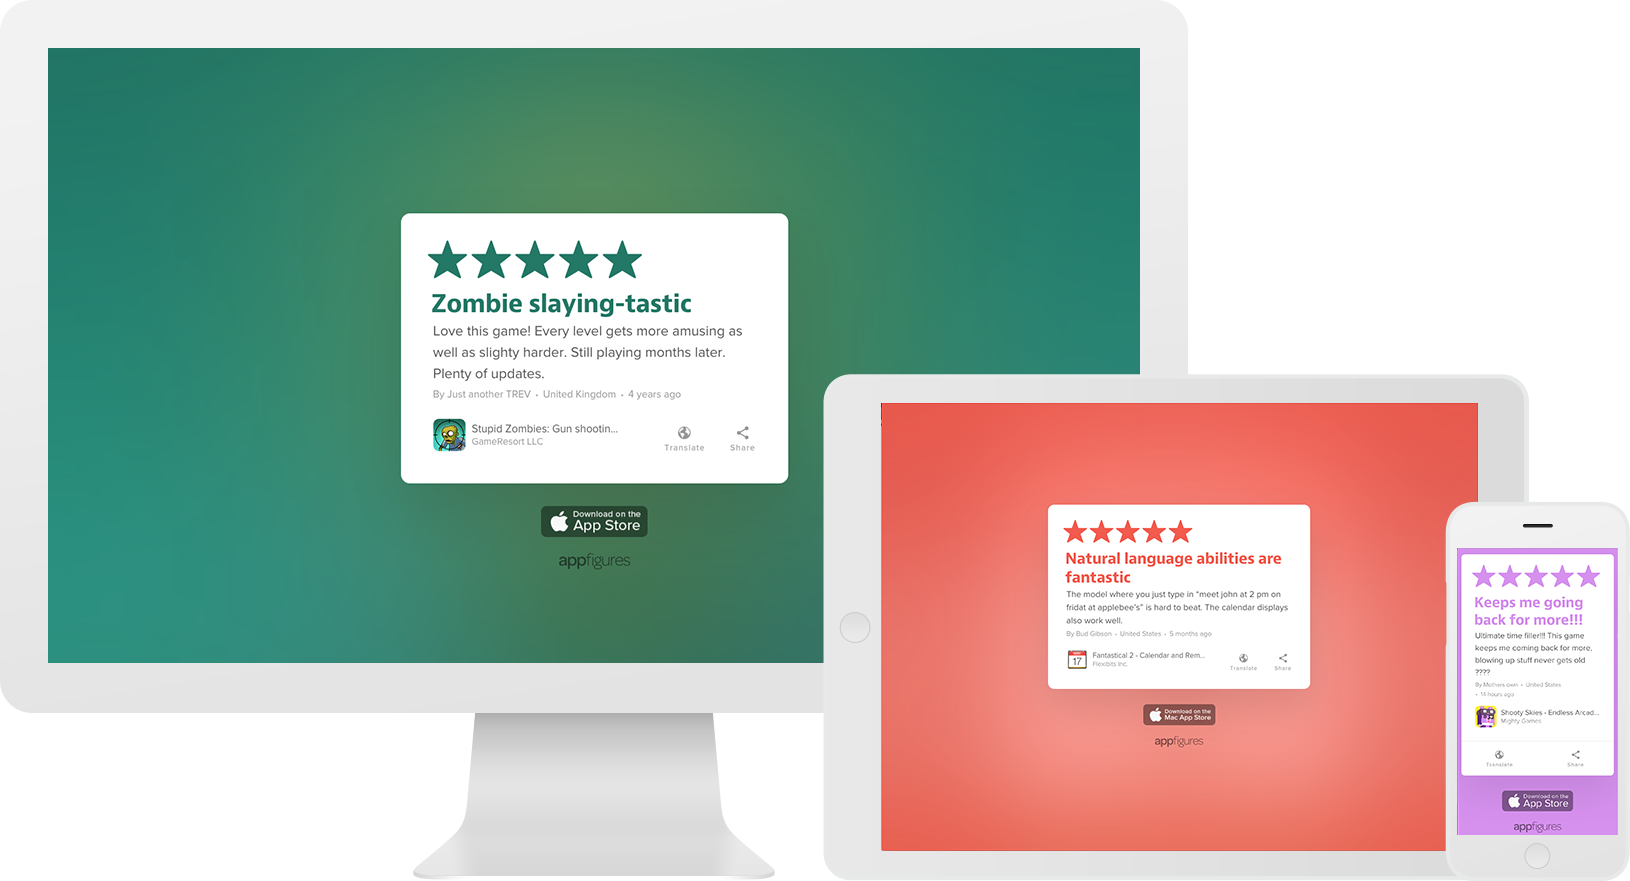 Share app store reviews with Review Cards from appFigures